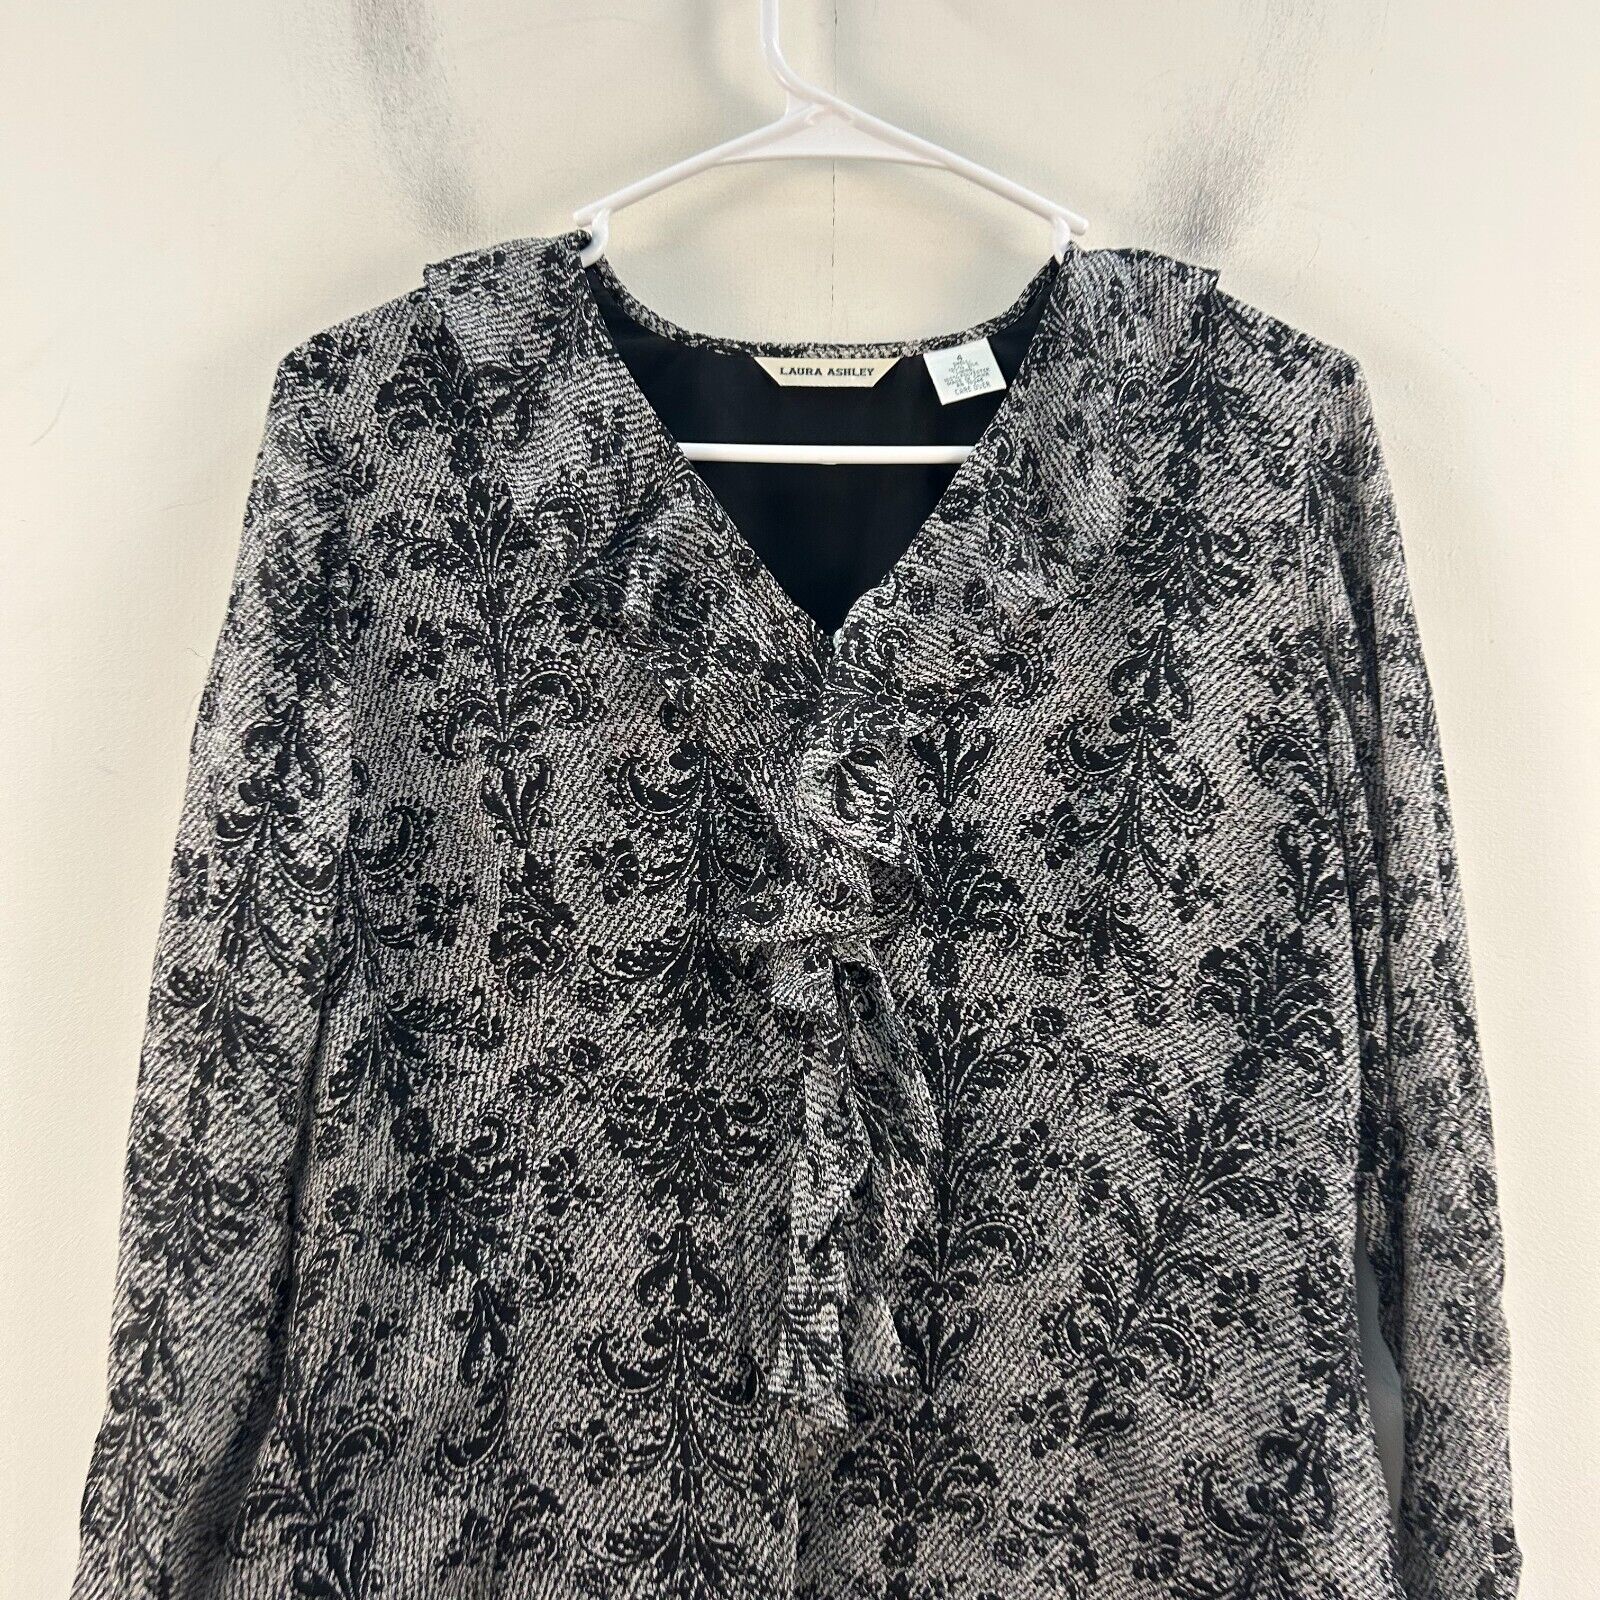 Laura Ashley Womens 4 Blouse Black Gray Floral Ch… - image 3